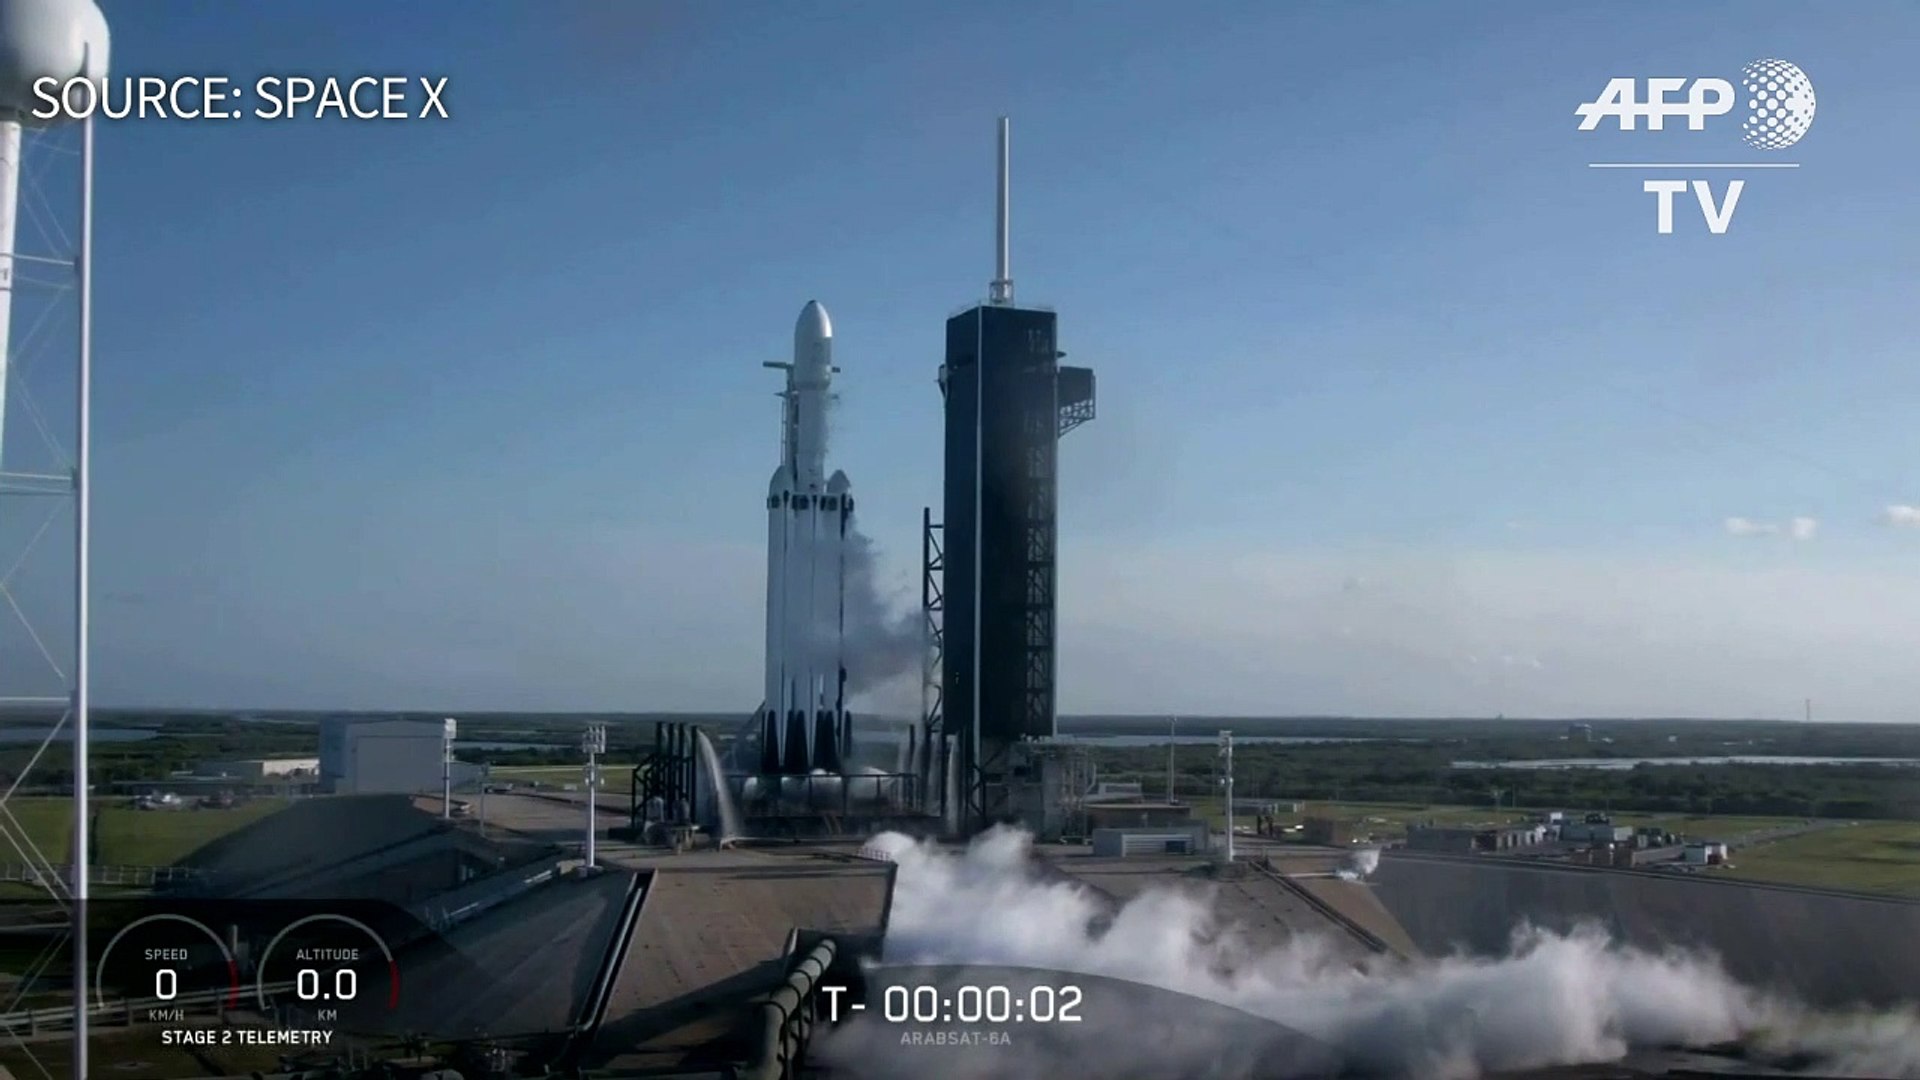 SpaceX carries out first commercial launch